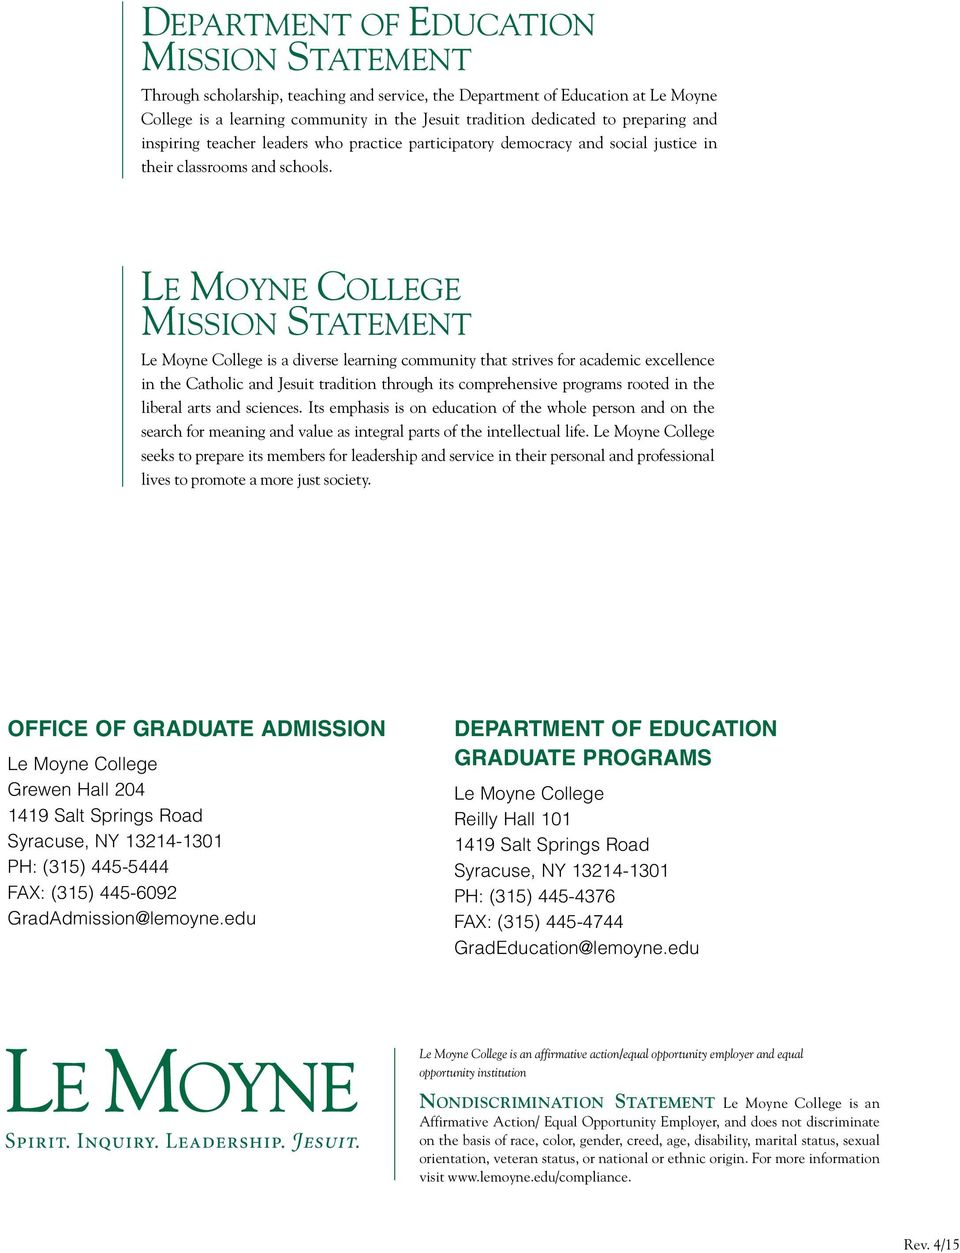 Le Moyne College Mission Statement Le Moyne College is a diverse learning community that strives for academic excellence in the Catholic and Jesuit tradition through its comprehensive programs rooted